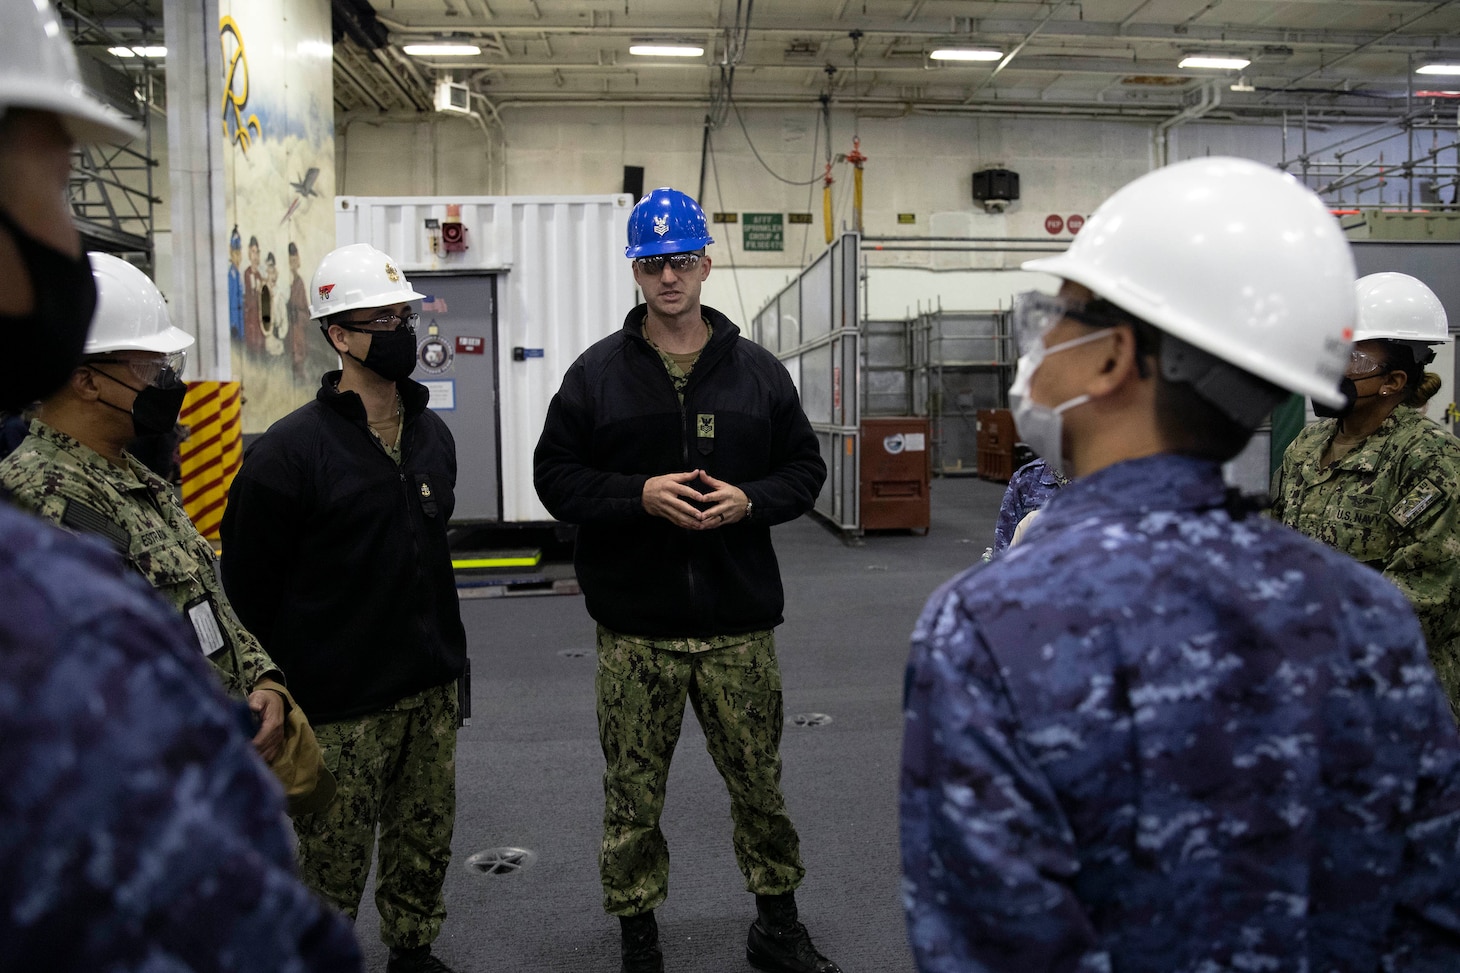 220405-N-MM501-1224 YOKOSUKA, Japan (April 5, 2022) Sailors assigned to the U.S. Navy’s only forward-deployed aircraft carrier USS Ronald Reagan (CVN 72) provide subject matter expert presentations to Japan Maritime Self-Defense Force and U.S. Navy Sailors during a tour of the ship during the U.S. 7th Fleet Sailor of the Year Week, April 5. U.S. 7th Fleet conducts forward-deployed naval operations in support of U.S. national interests in the Indo-Asia-Pacific area of operations. As the U.S. Navy’s largest numbered fleet, 7th Fleet interacts with 35 other maritime nations to build maritime partnerships that foster maritime security, promote stability, and prevent conflict. (U.S. Navy photo by Mass Communication Specialist 2nd Class Shannon Burns)